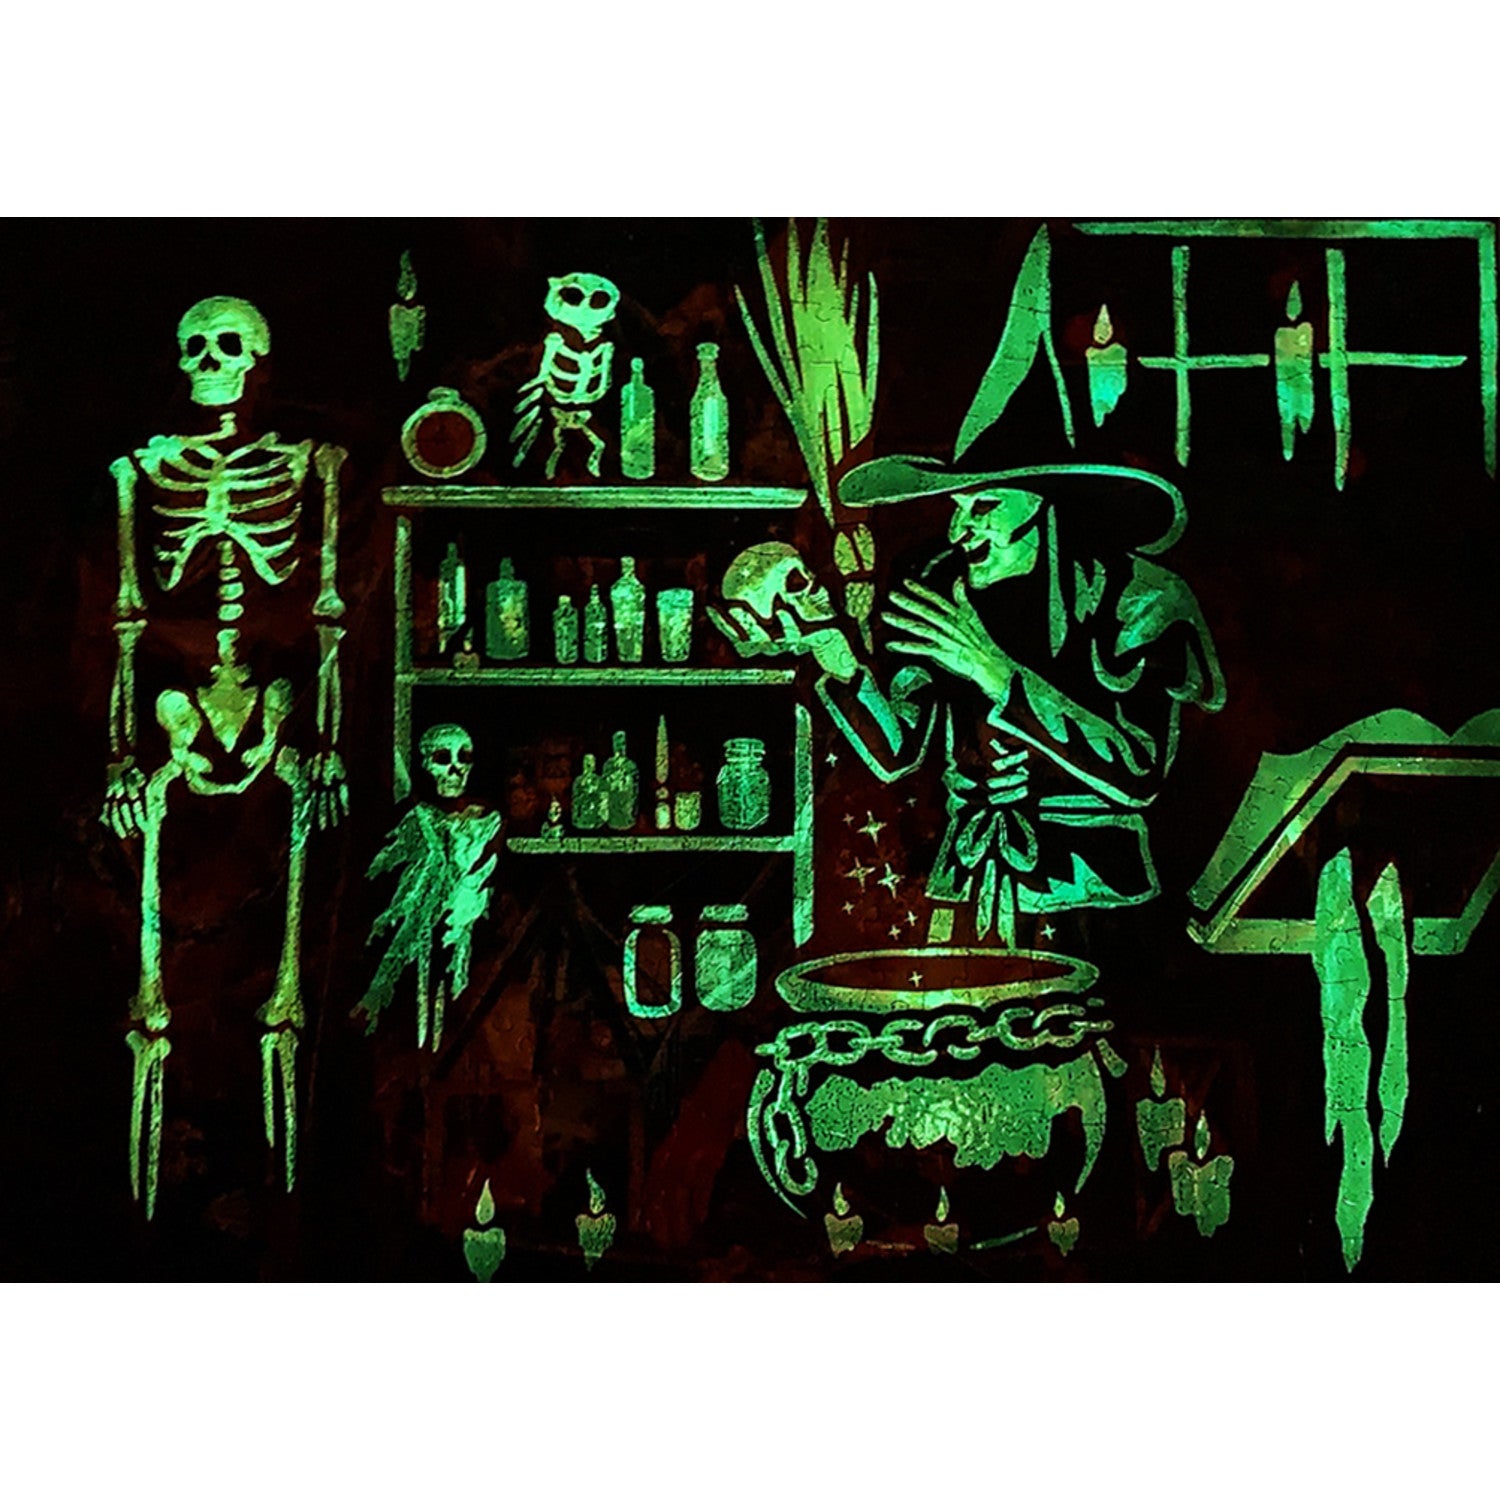 Glow in the Dark - On a Scary Night in October 500 Piece Jigsaw Puzzle